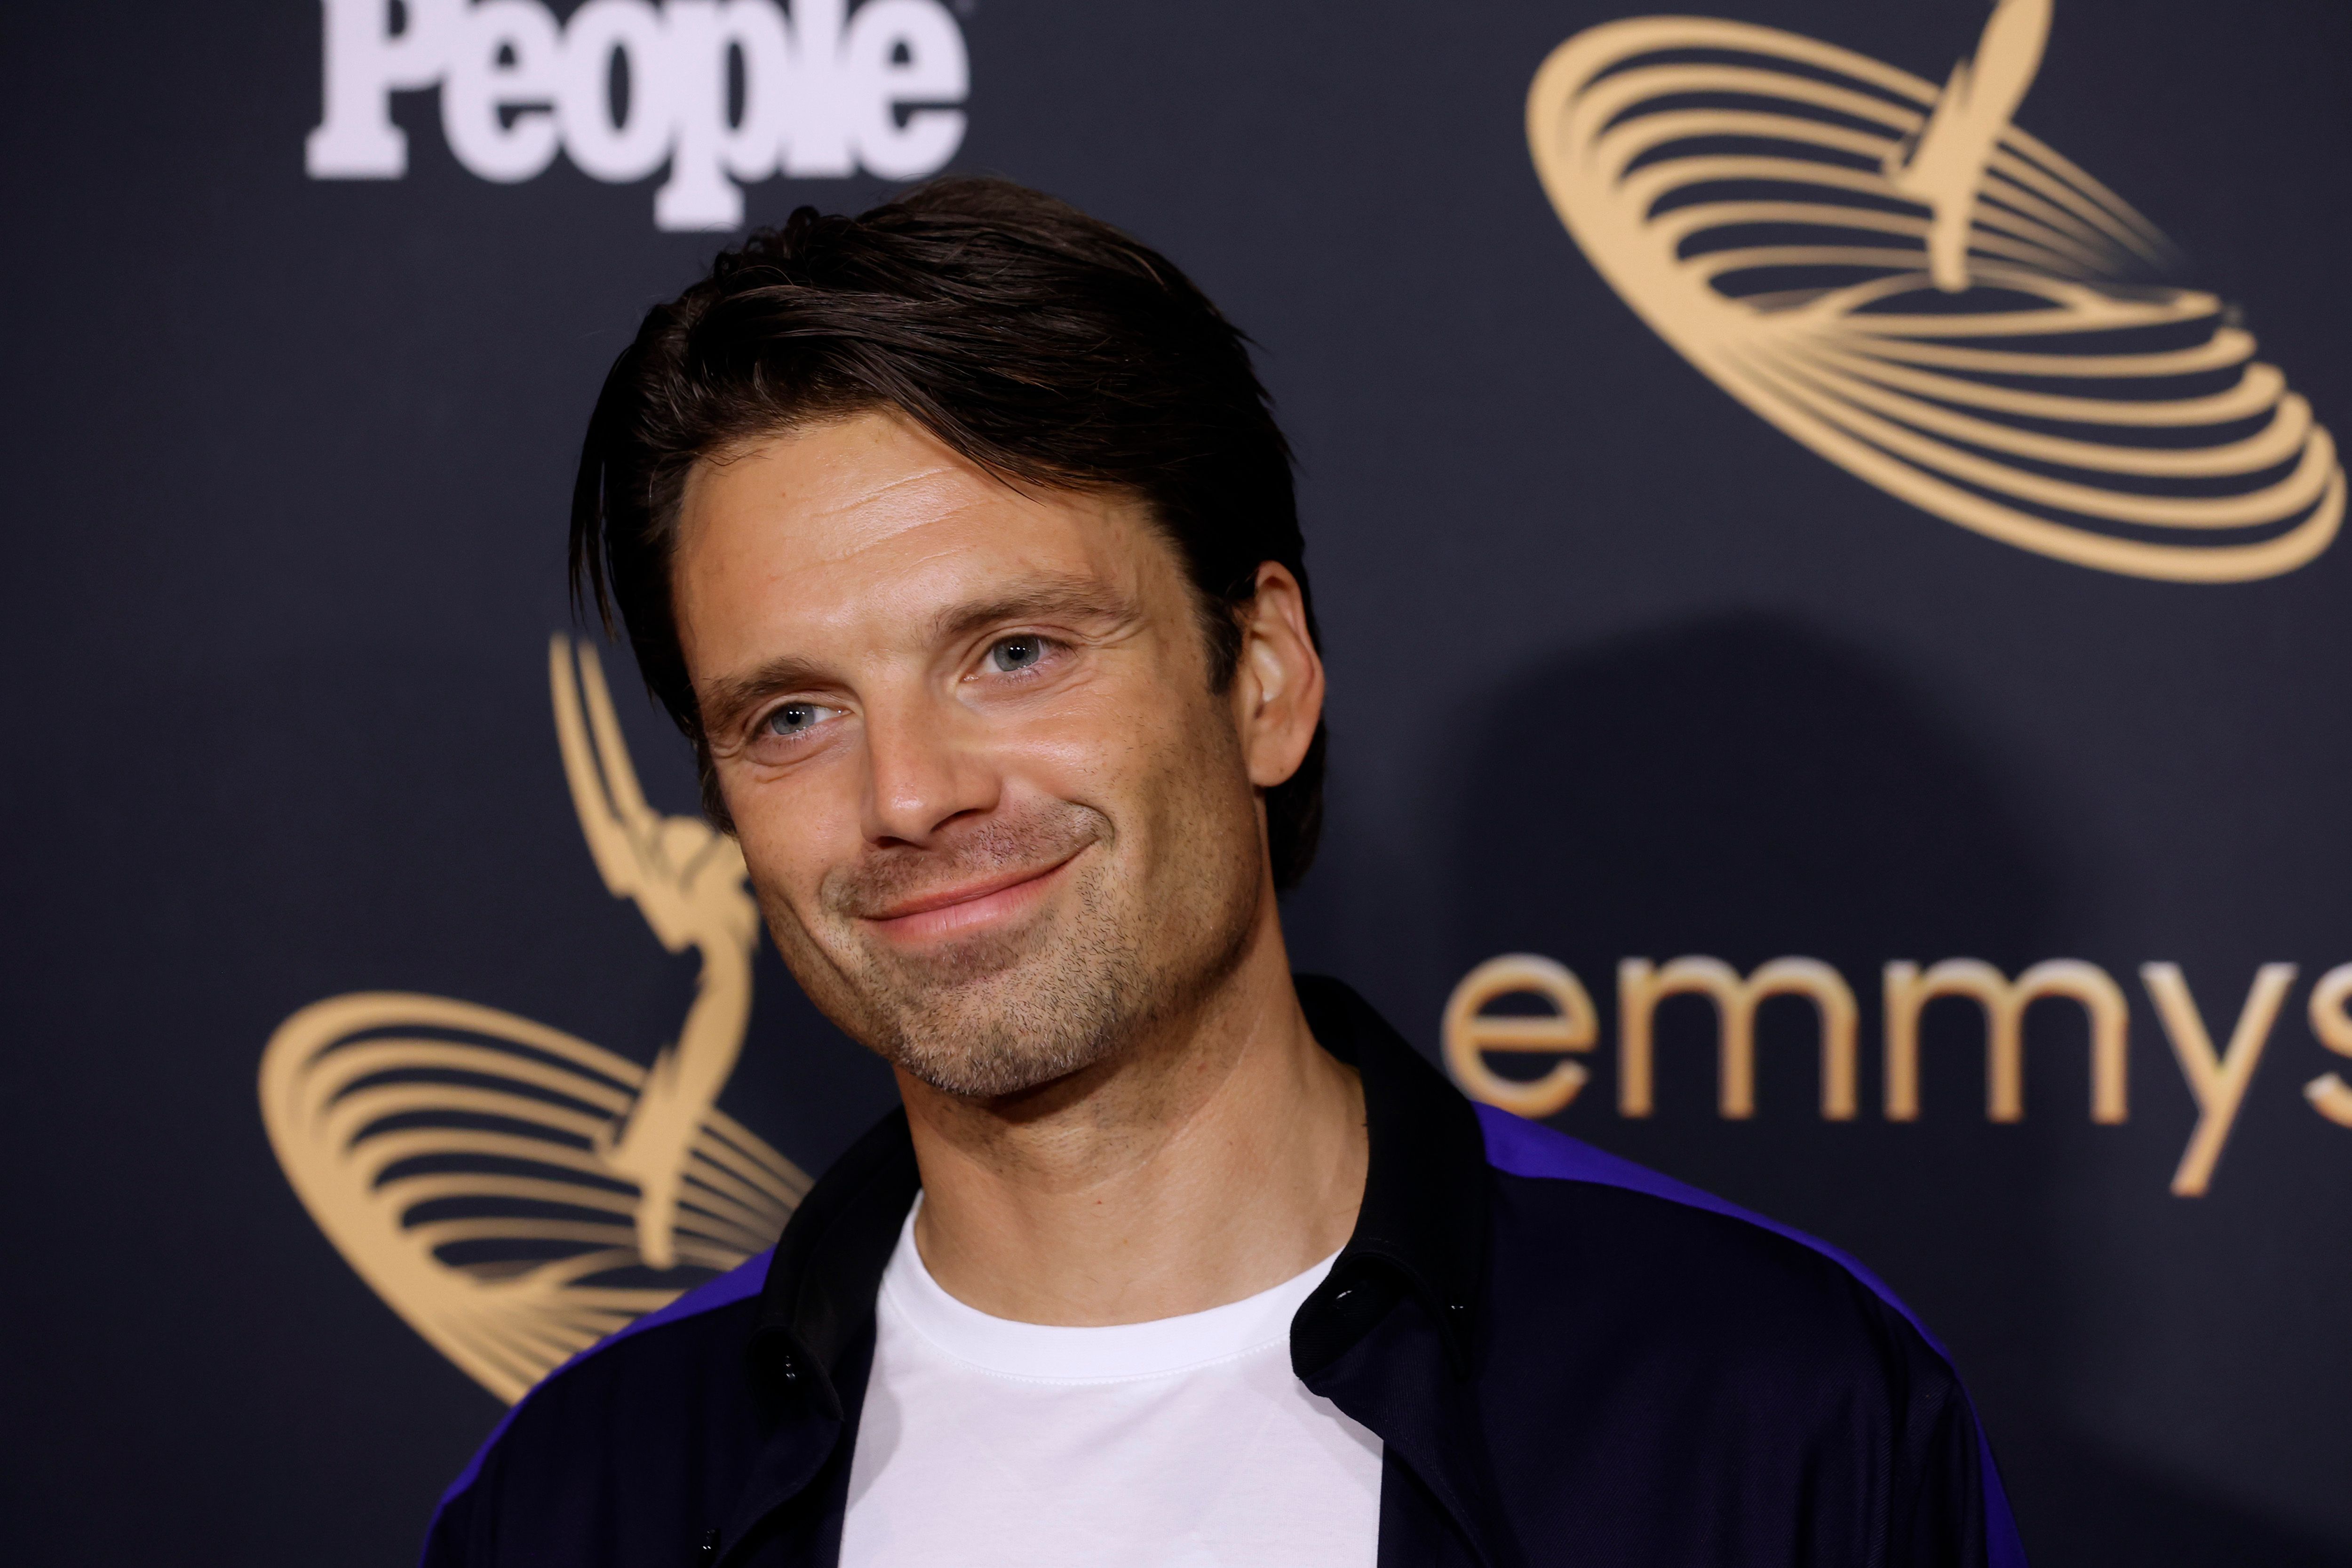 Sebastian Stan at the 74th Primetime Emmy Awards Performers Nominee Reception in September 2022, in Los Angeles, California. | Source: Getty Images 